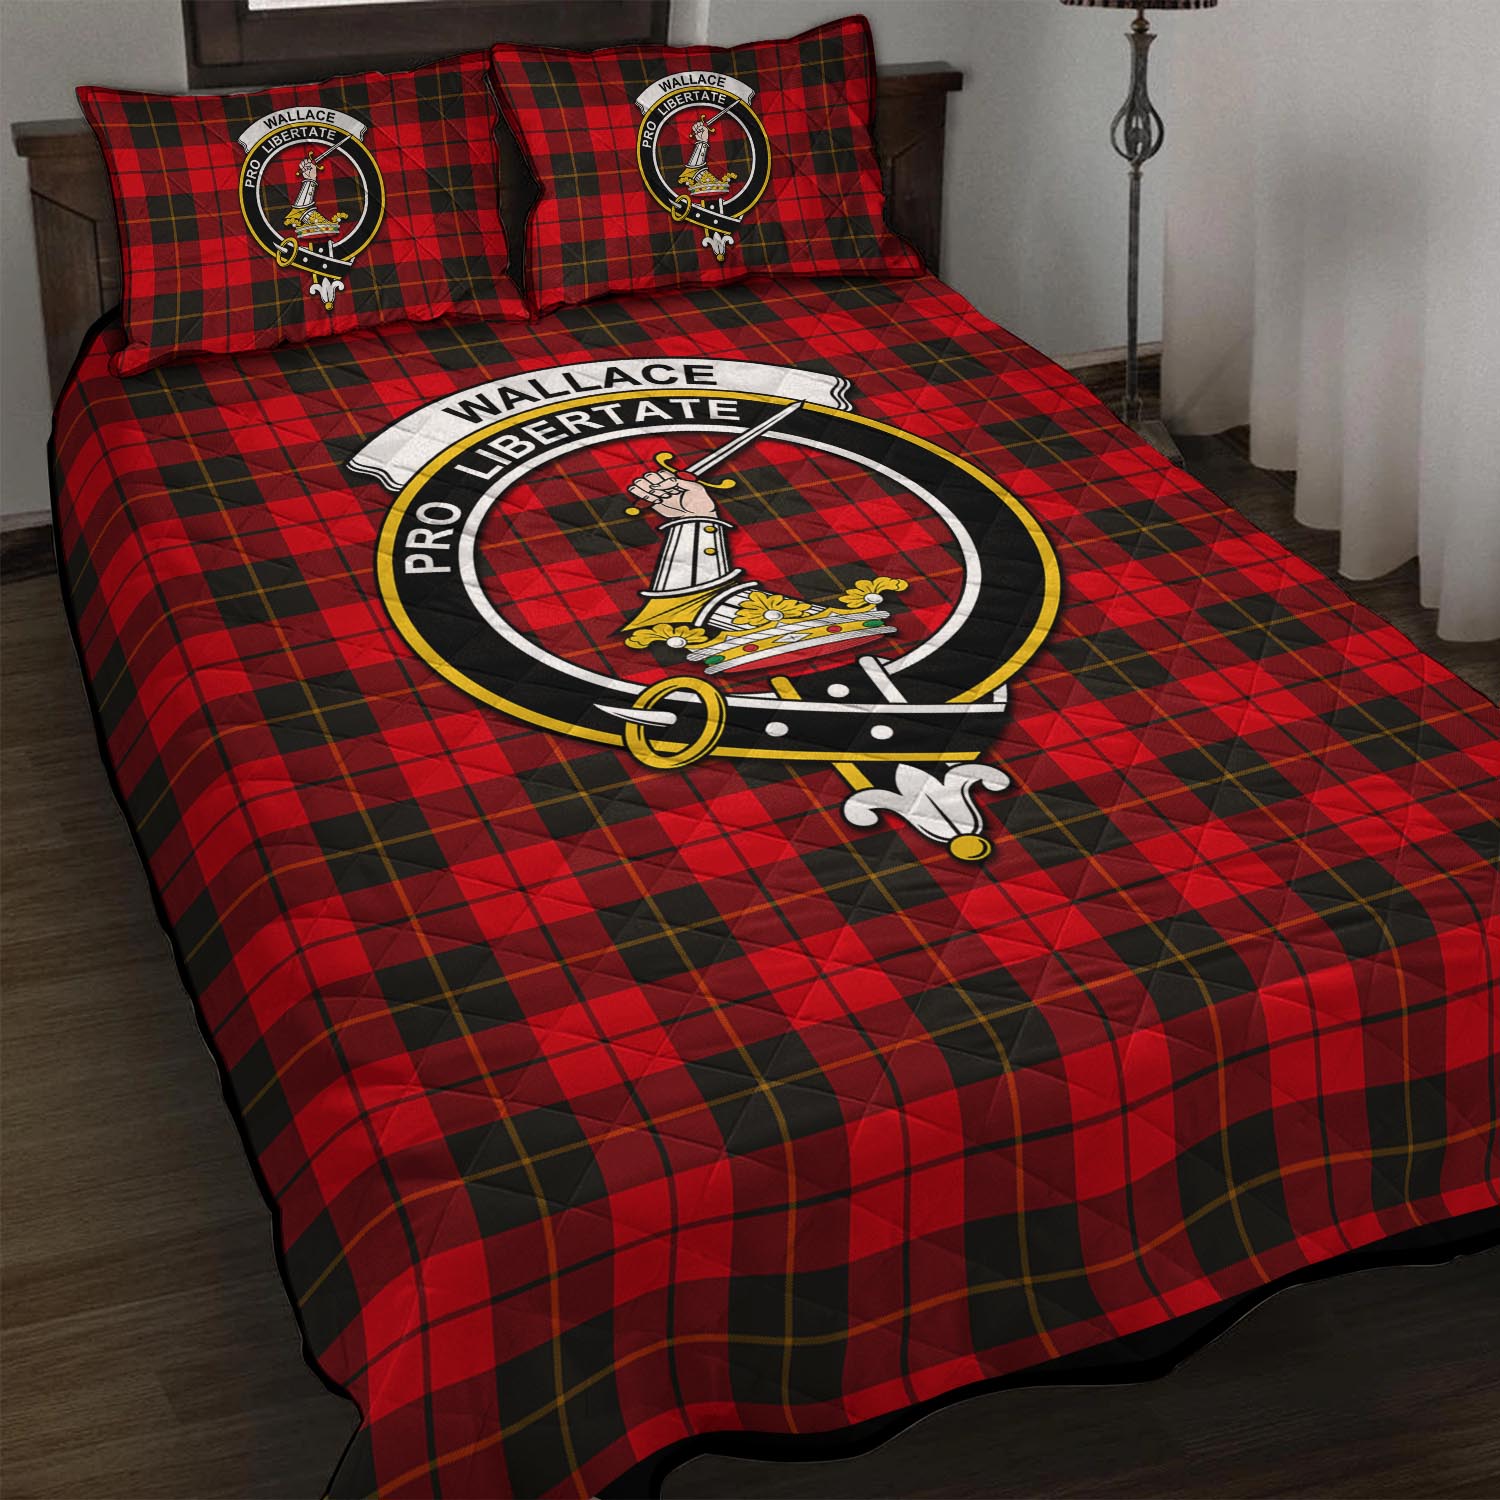 Wallace Weathered Tartan Quilt Bed Set with Family Crest